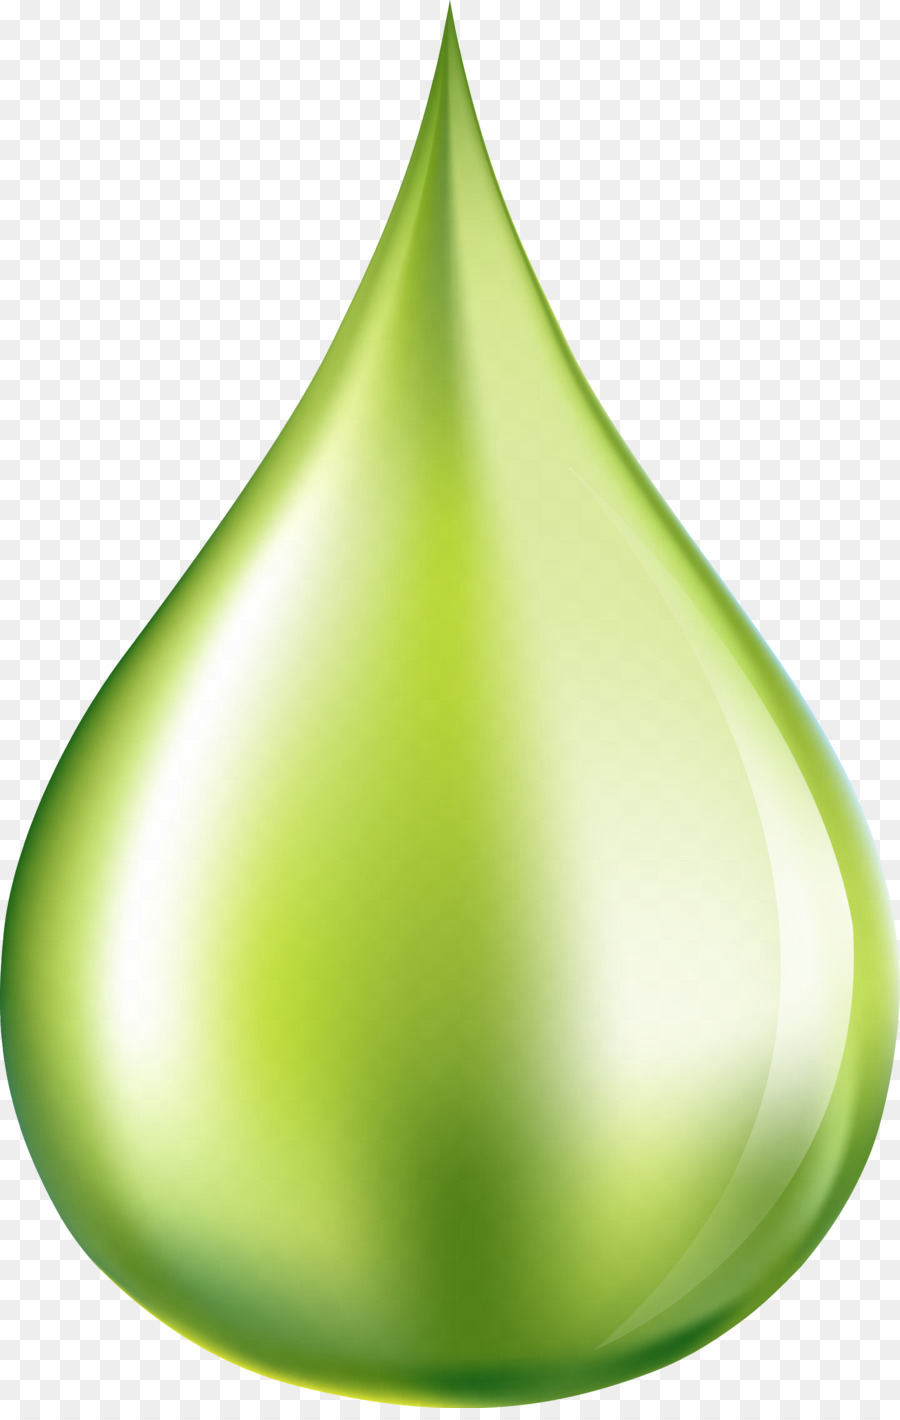 Water Drop - Hand painted green water droplets png download - 1962*3070 - Free Transparent Water png Download.